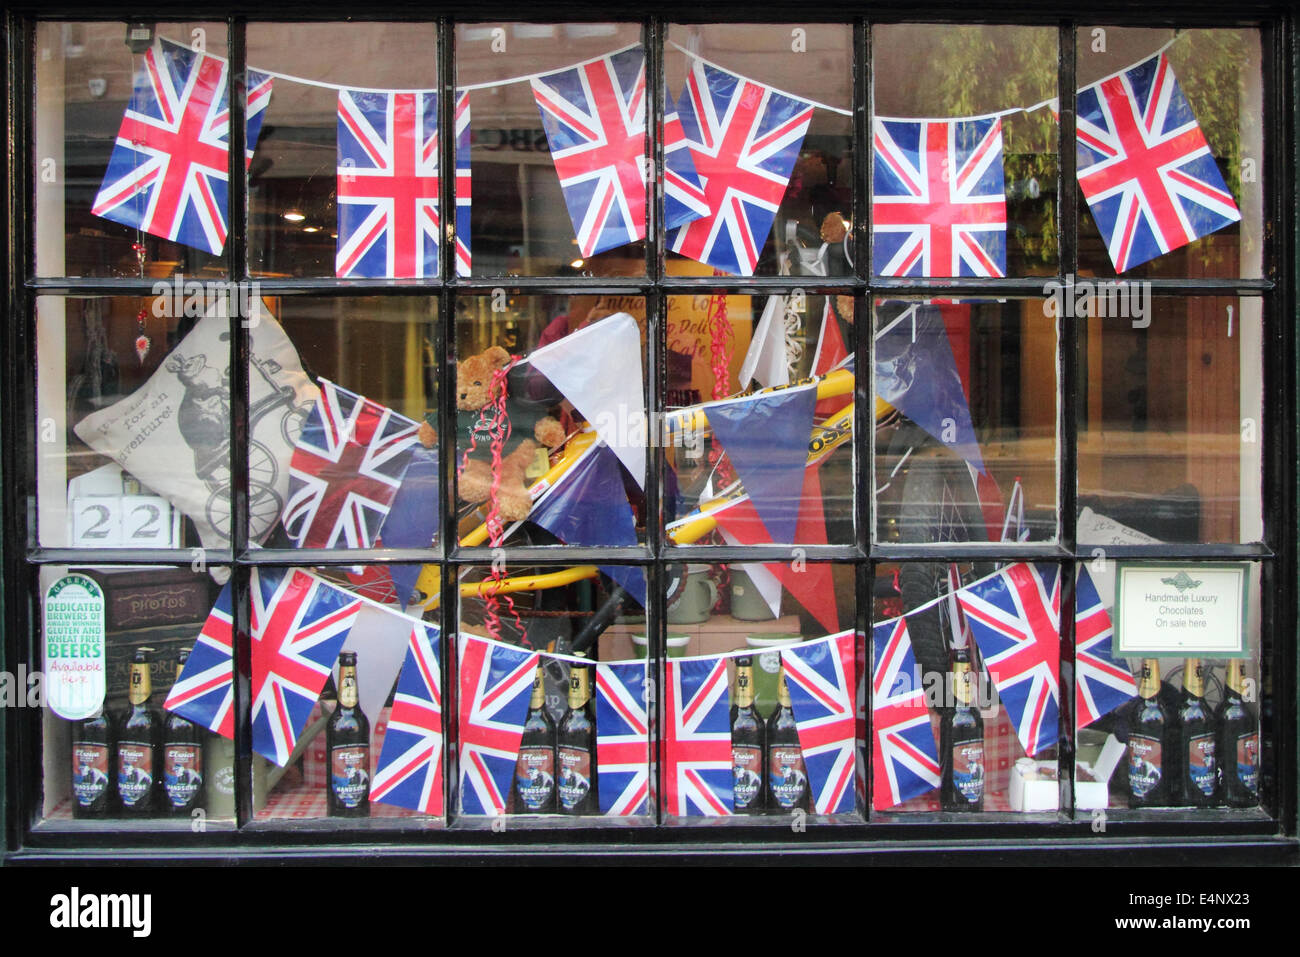 Union Jack bunting displayed in the window of The Old Original Bakewell Pudding Shop, Bakewell, Peak District, England, UK Stock Photo